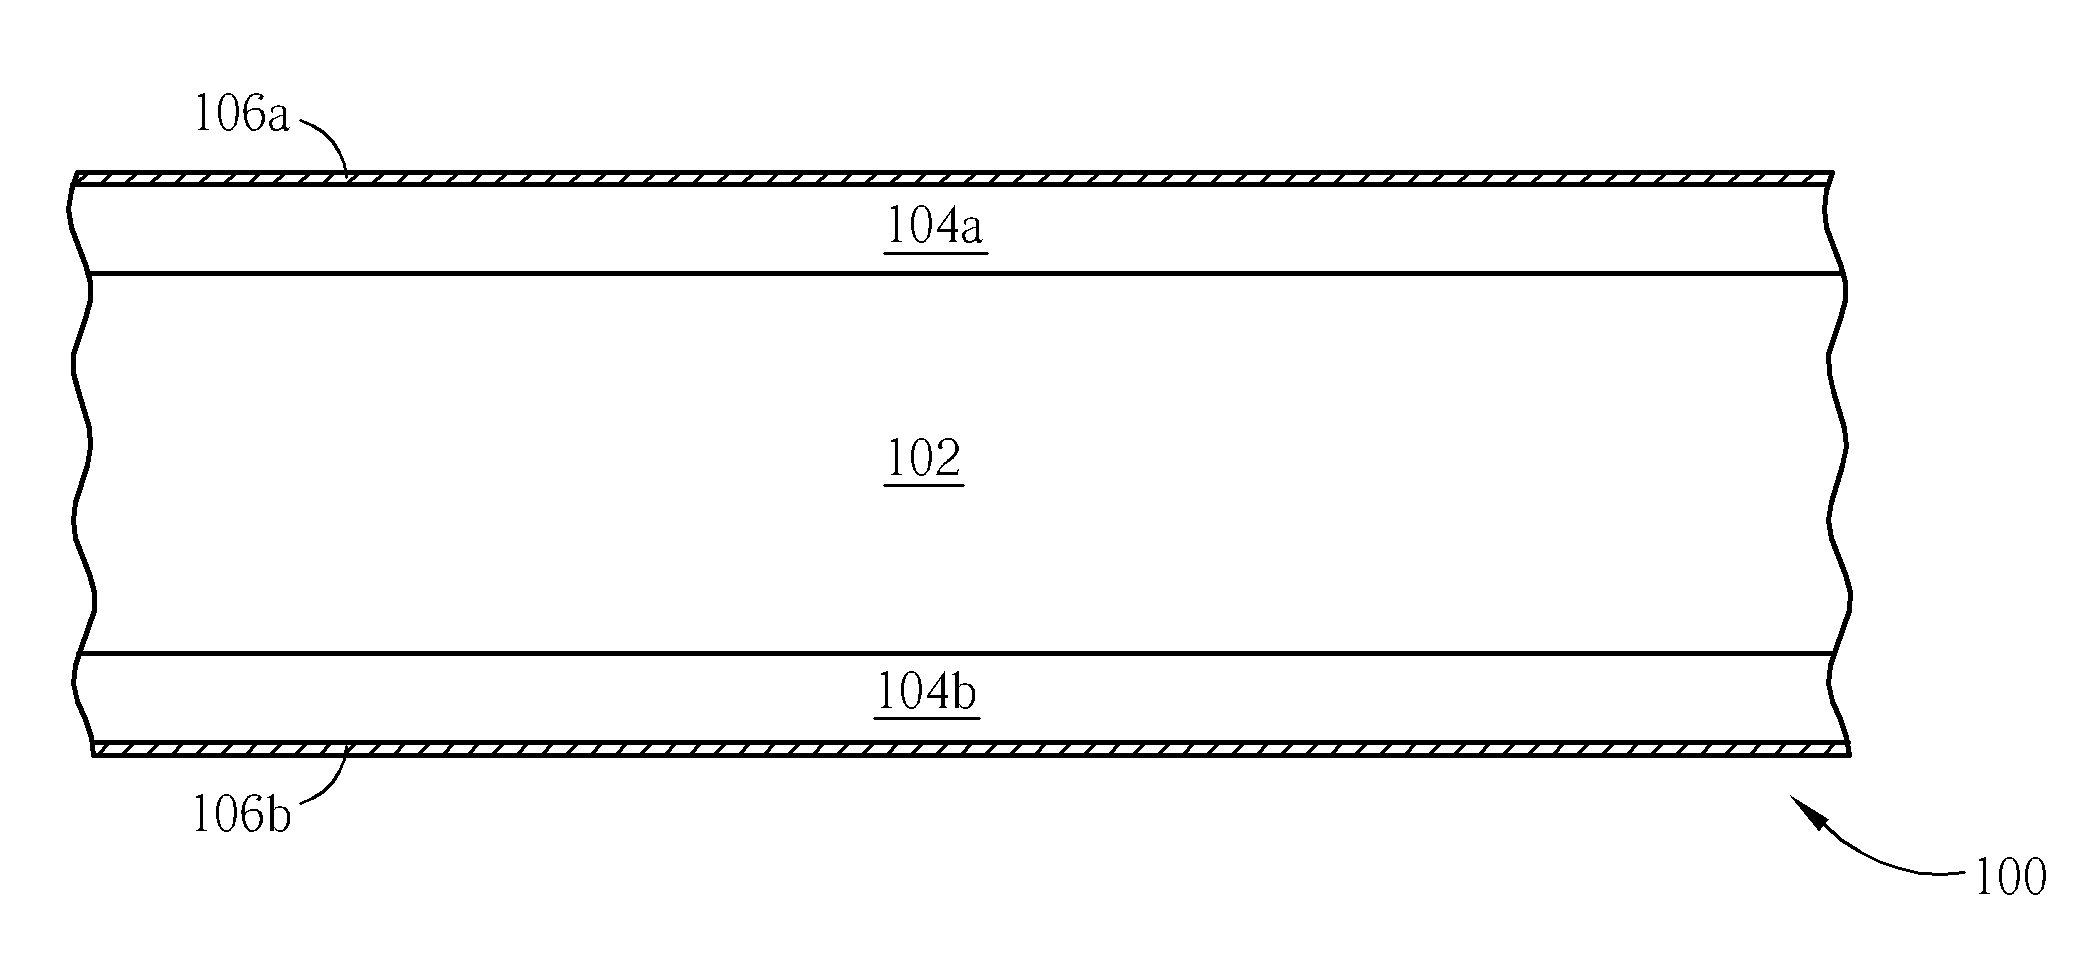 Method for forming micro blind via on a copper clad laminate substrate utilizing laser drilling technique